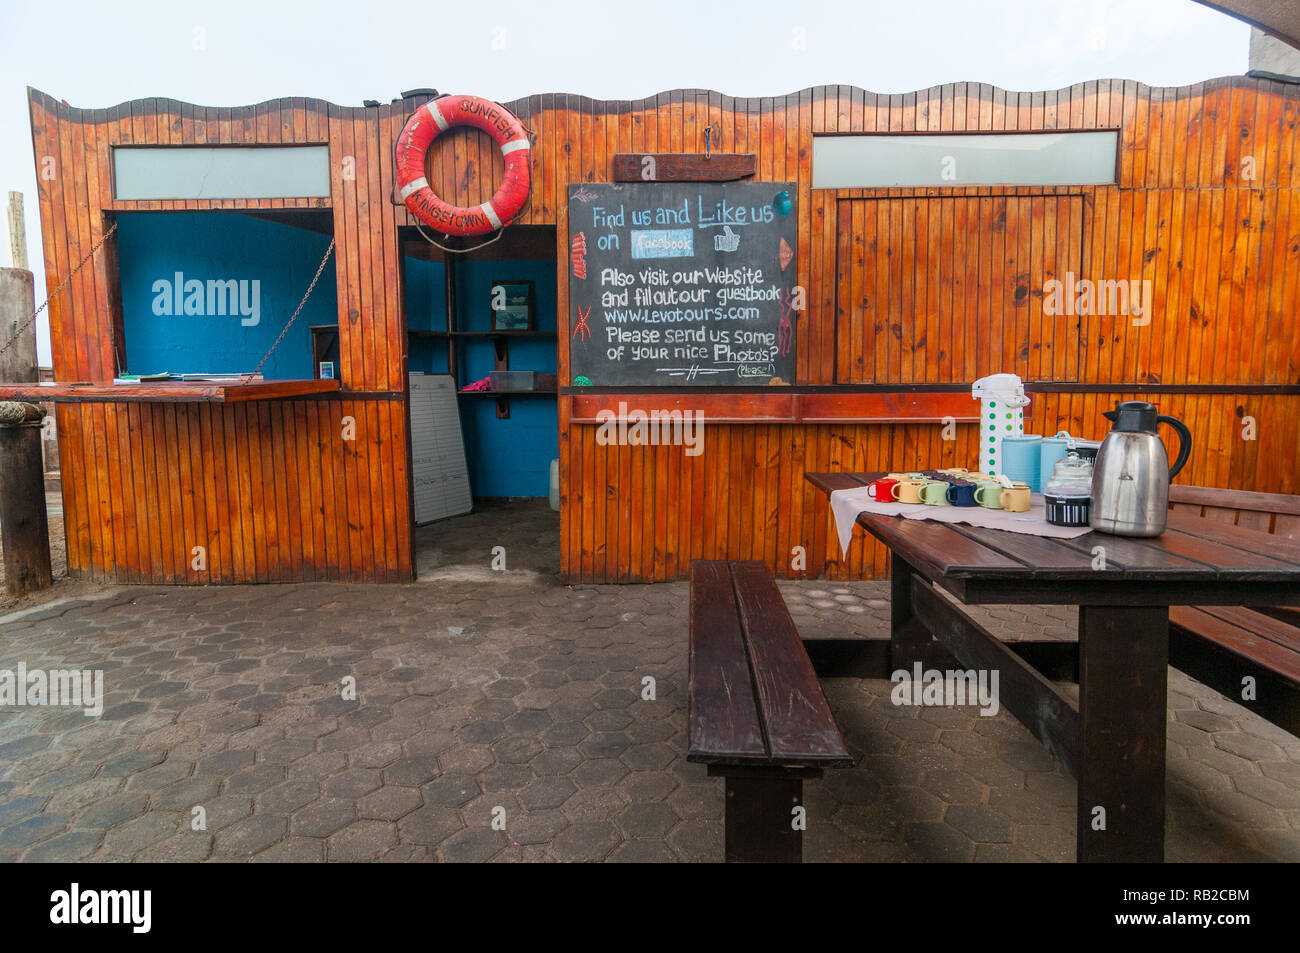 waiting area for boat trip, levotours, Walvis Bay, Namibia Stock Photo